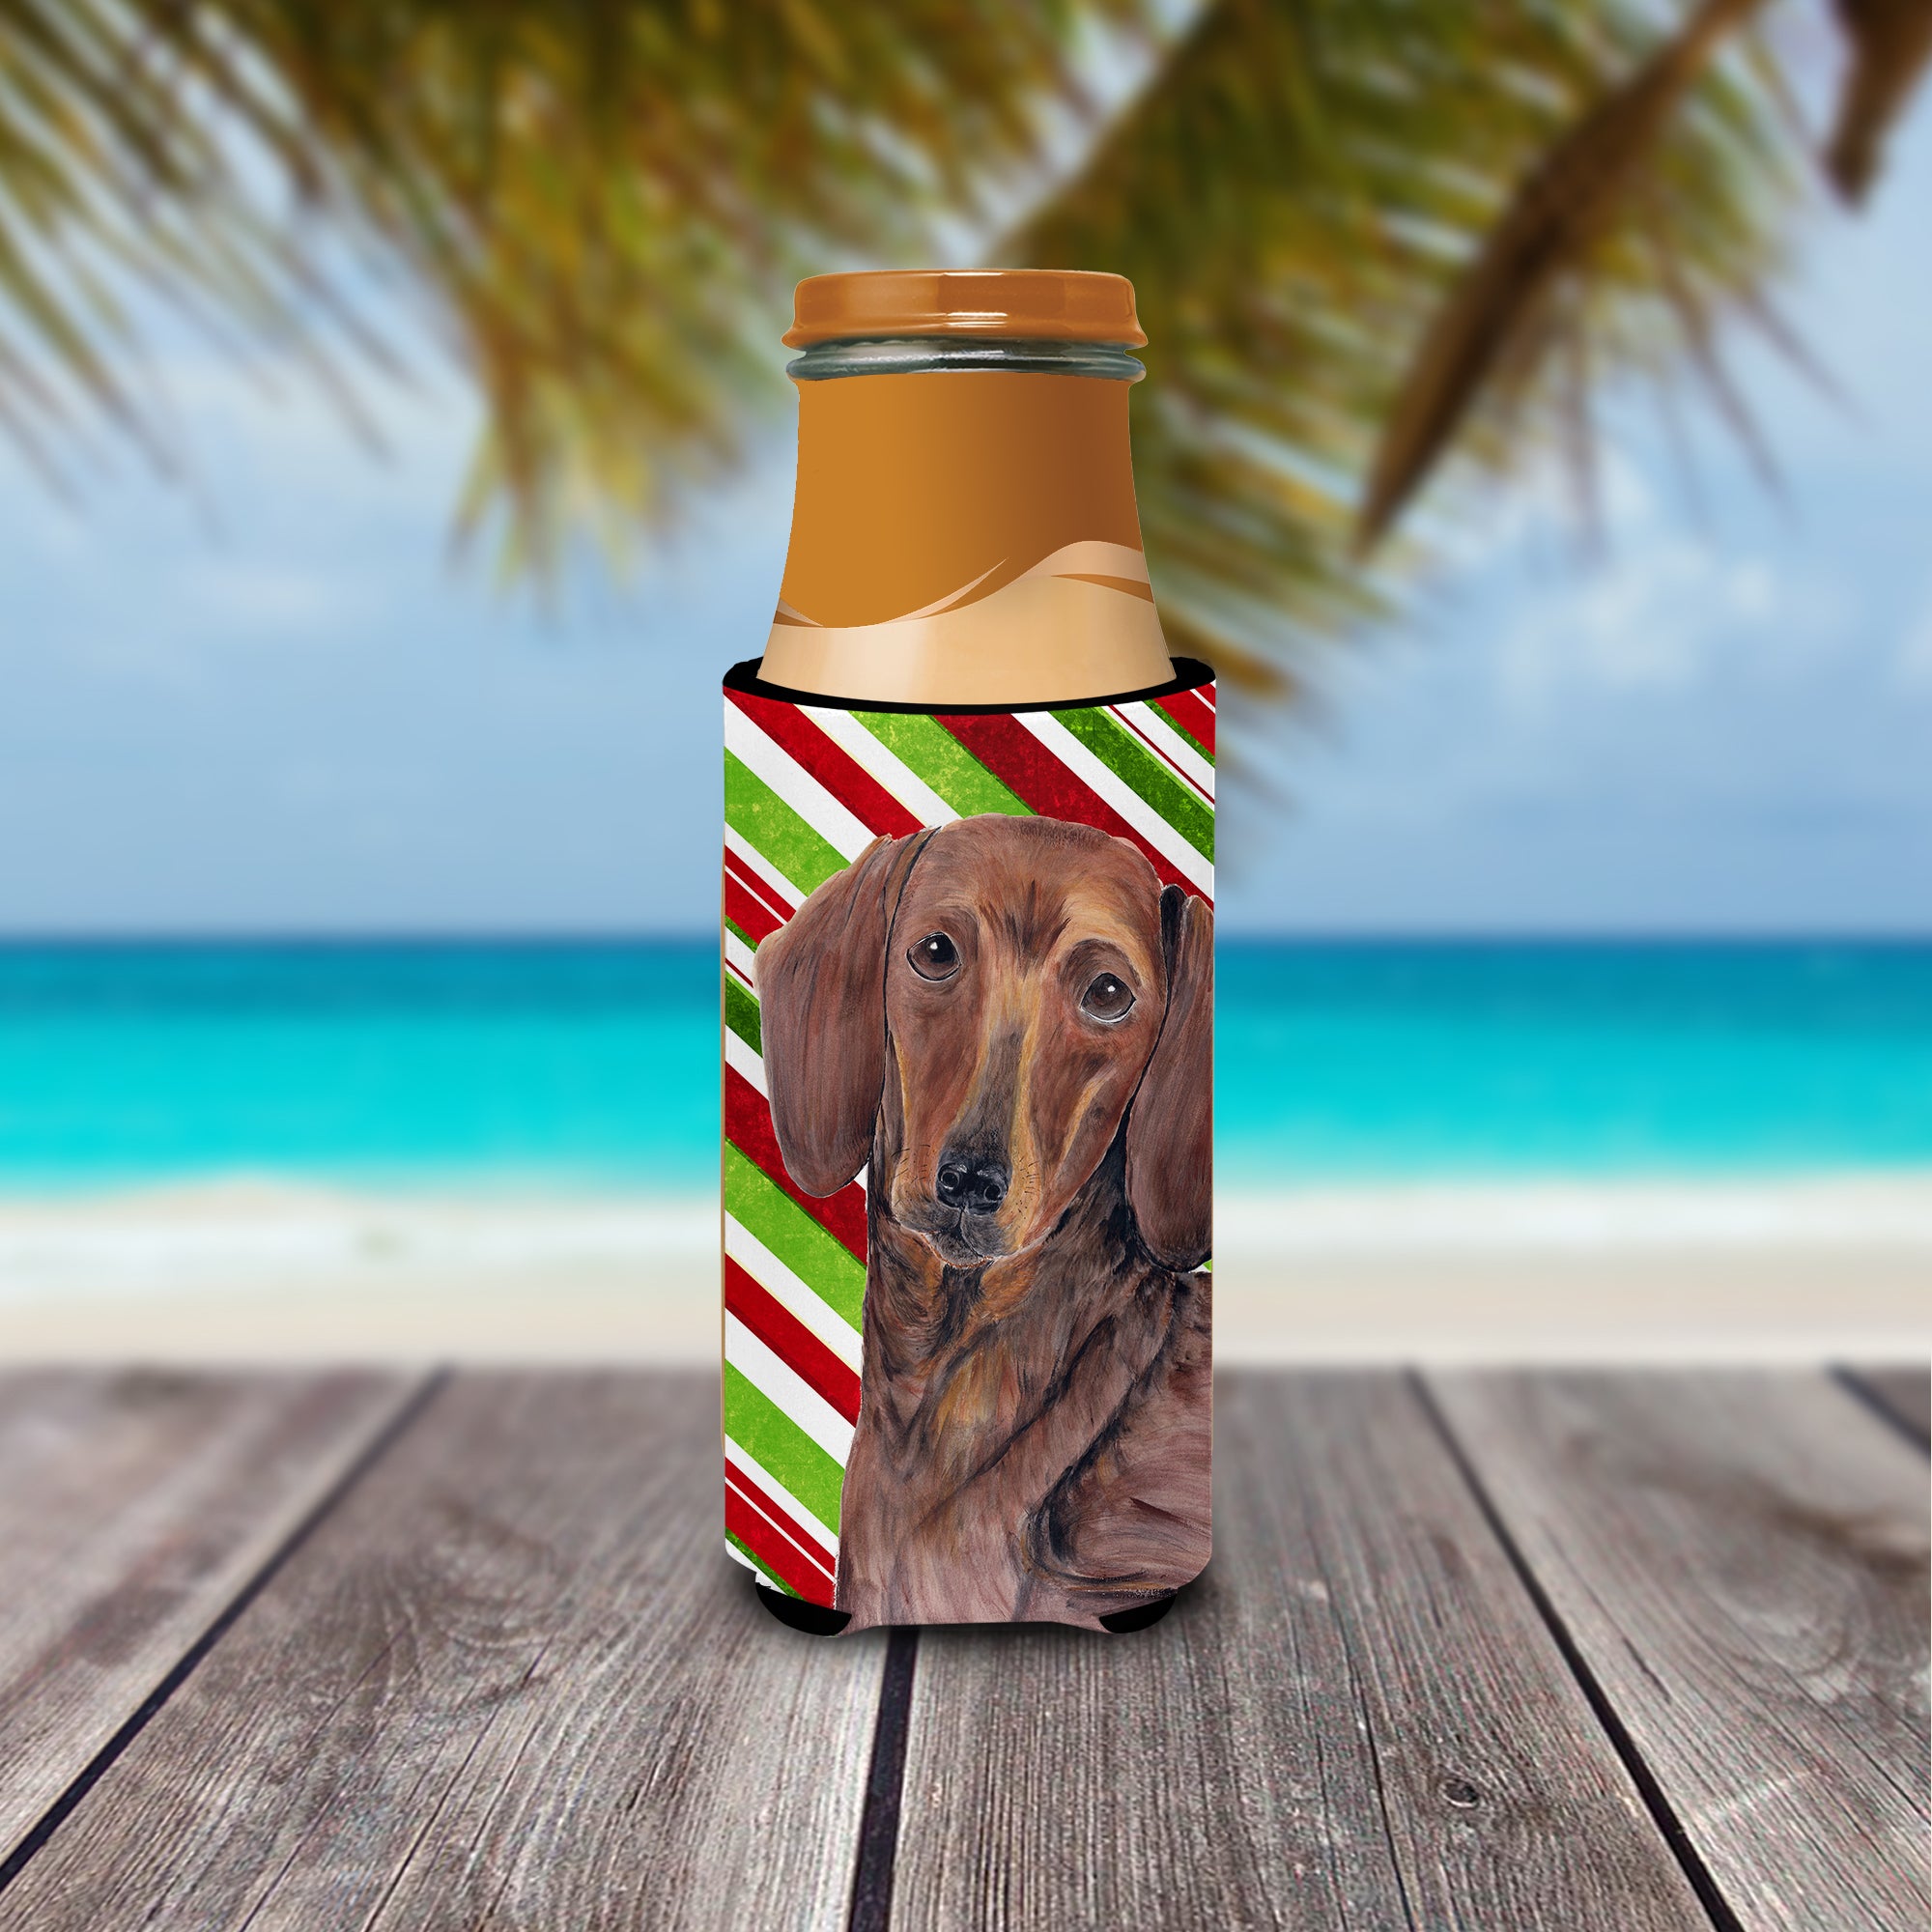 Dachshund Candy Cane Holiday Christmas Ultra Beverage Insulators for slim cans SC9328MUK